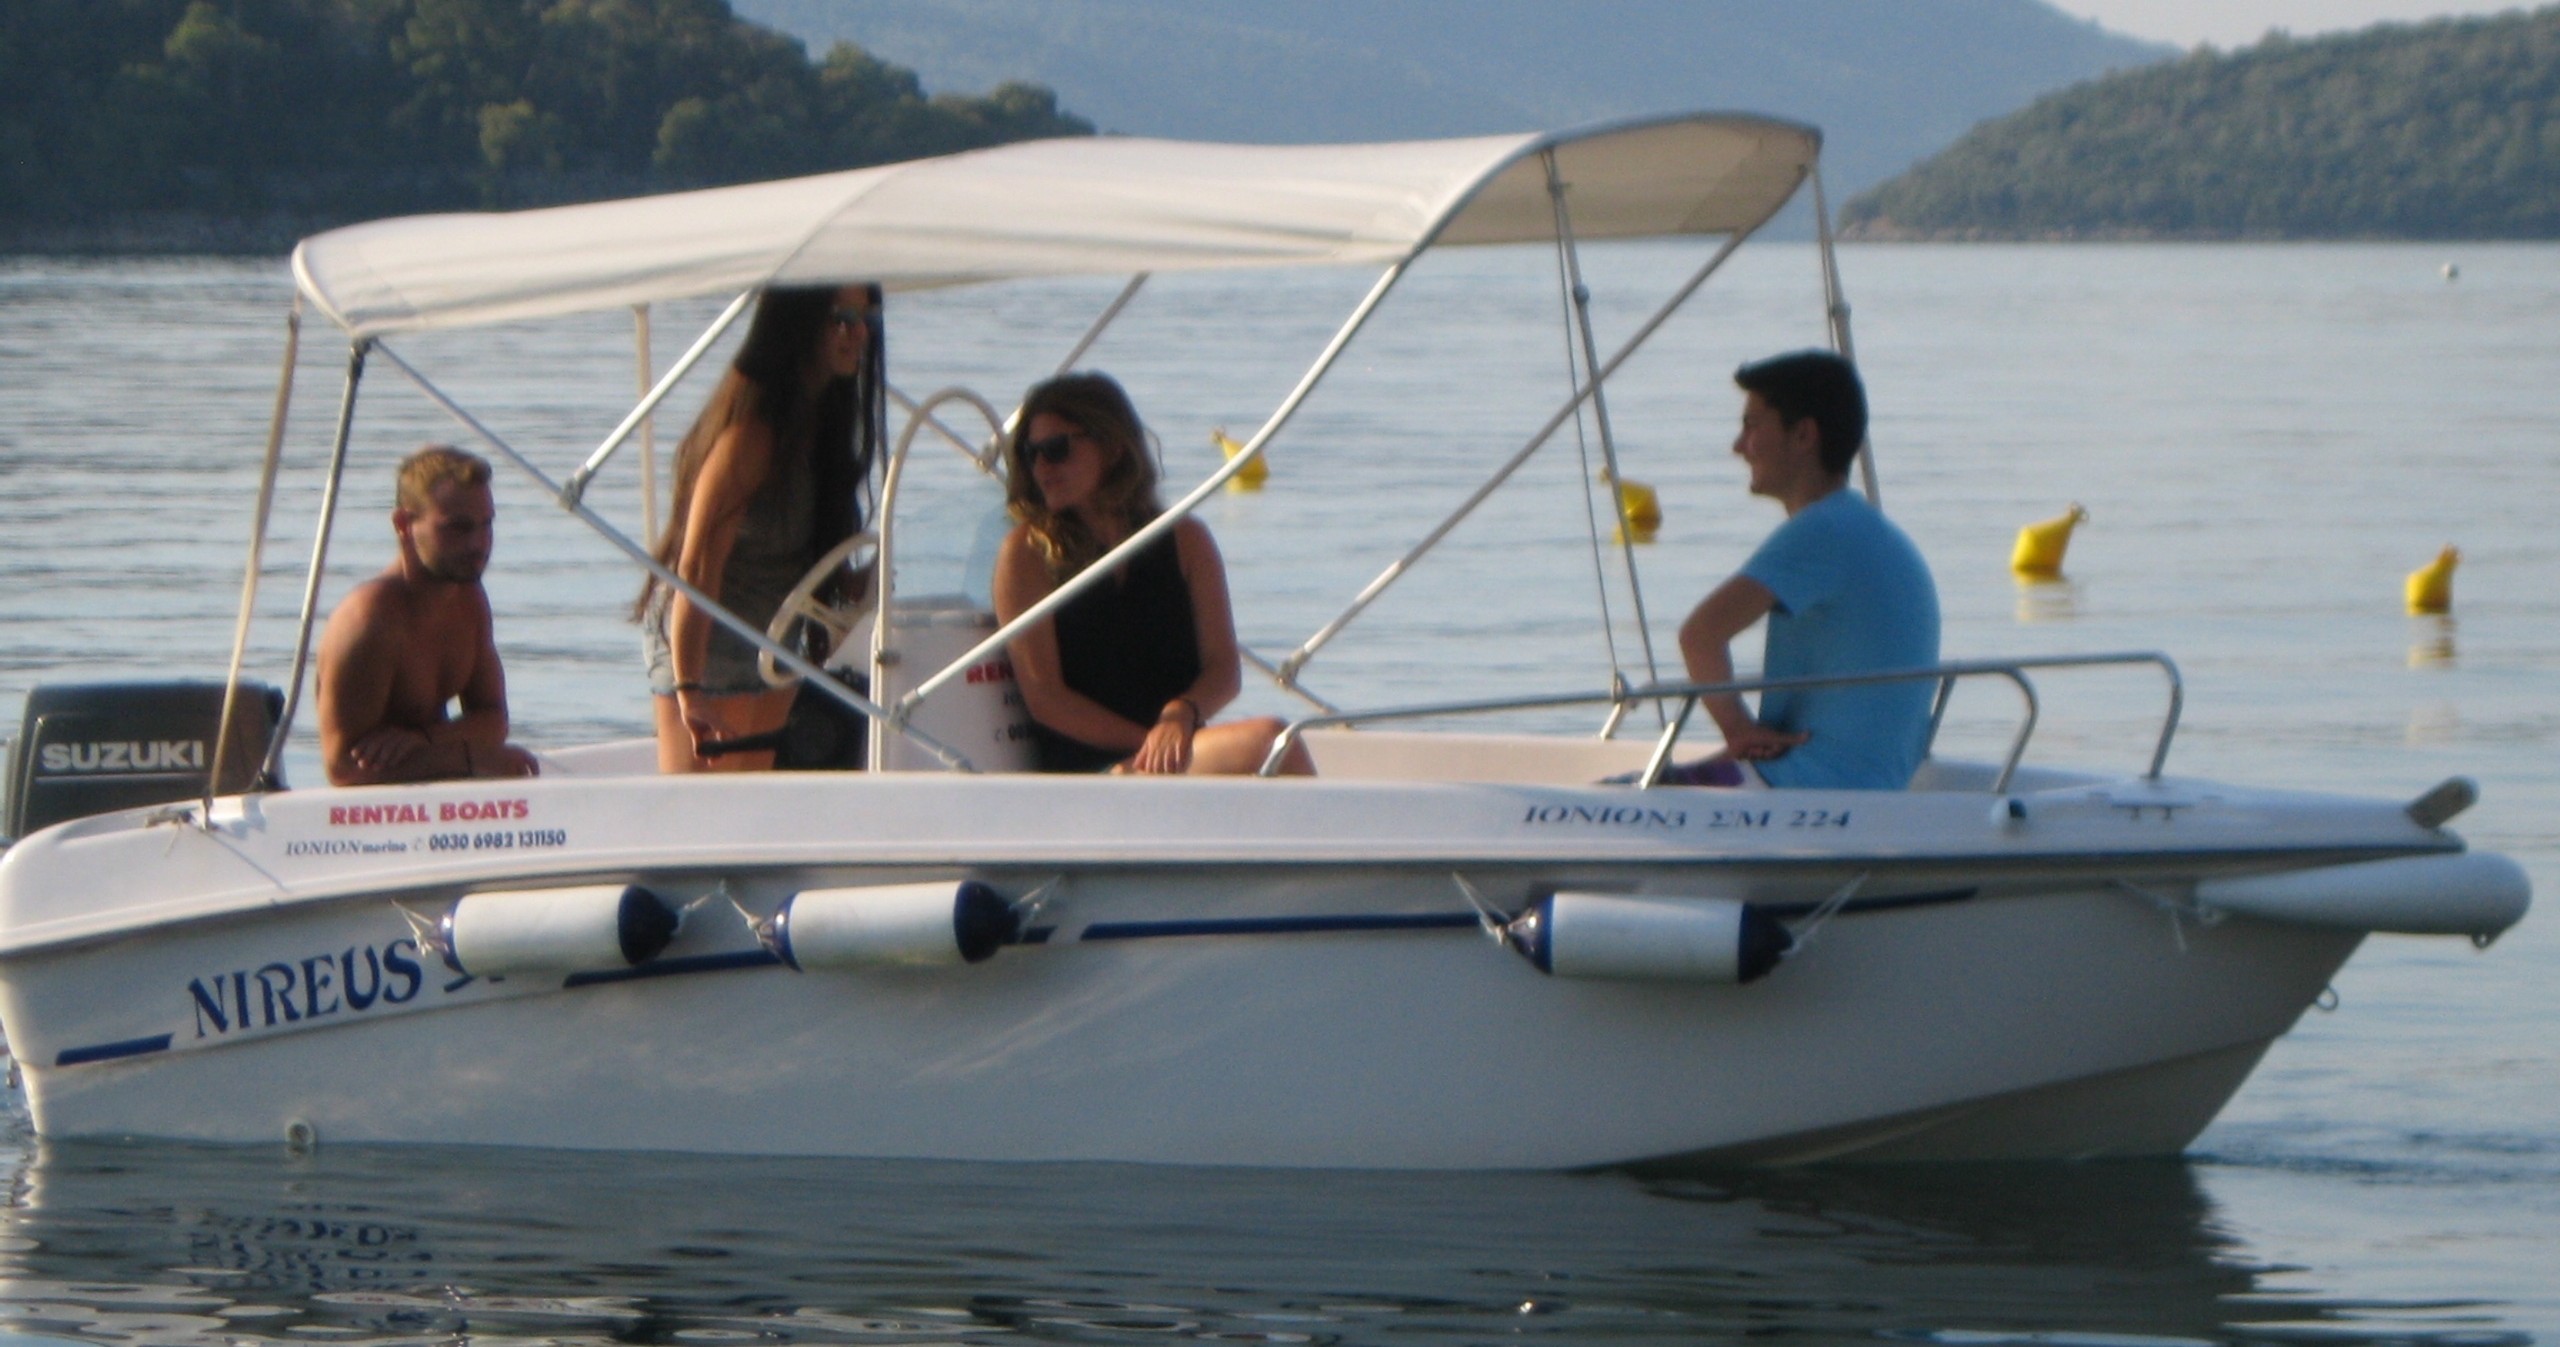 Day boat rental in Lefkada without license